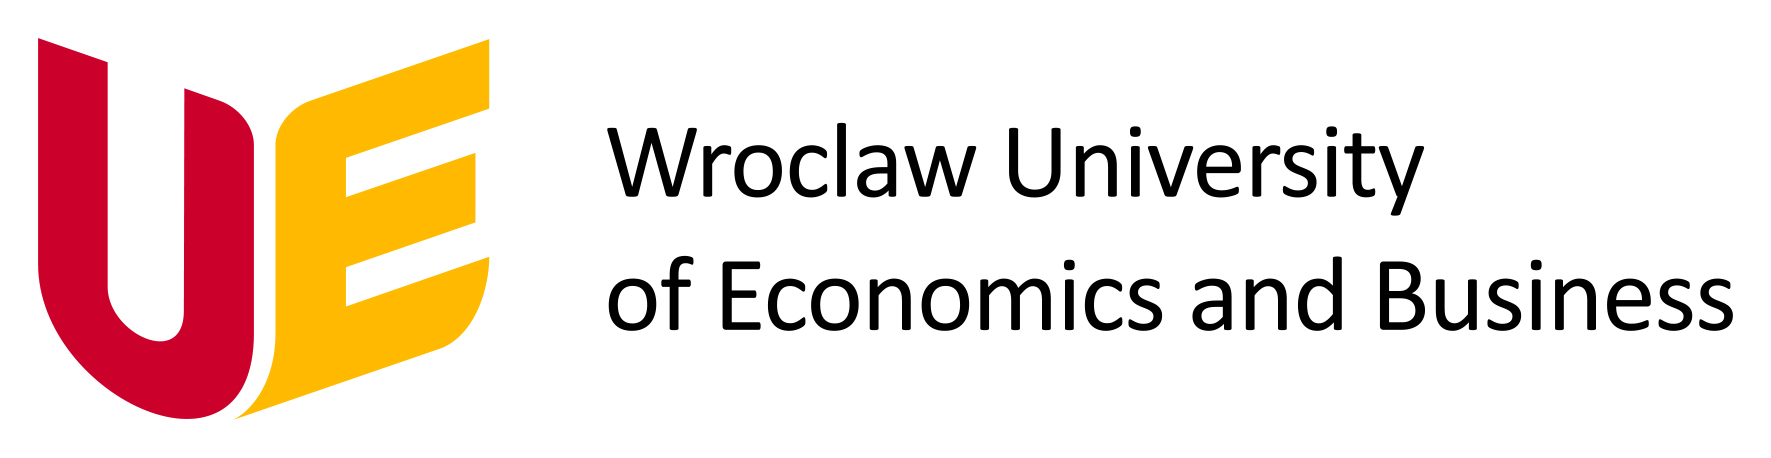 wroclaw university of economics and business logo